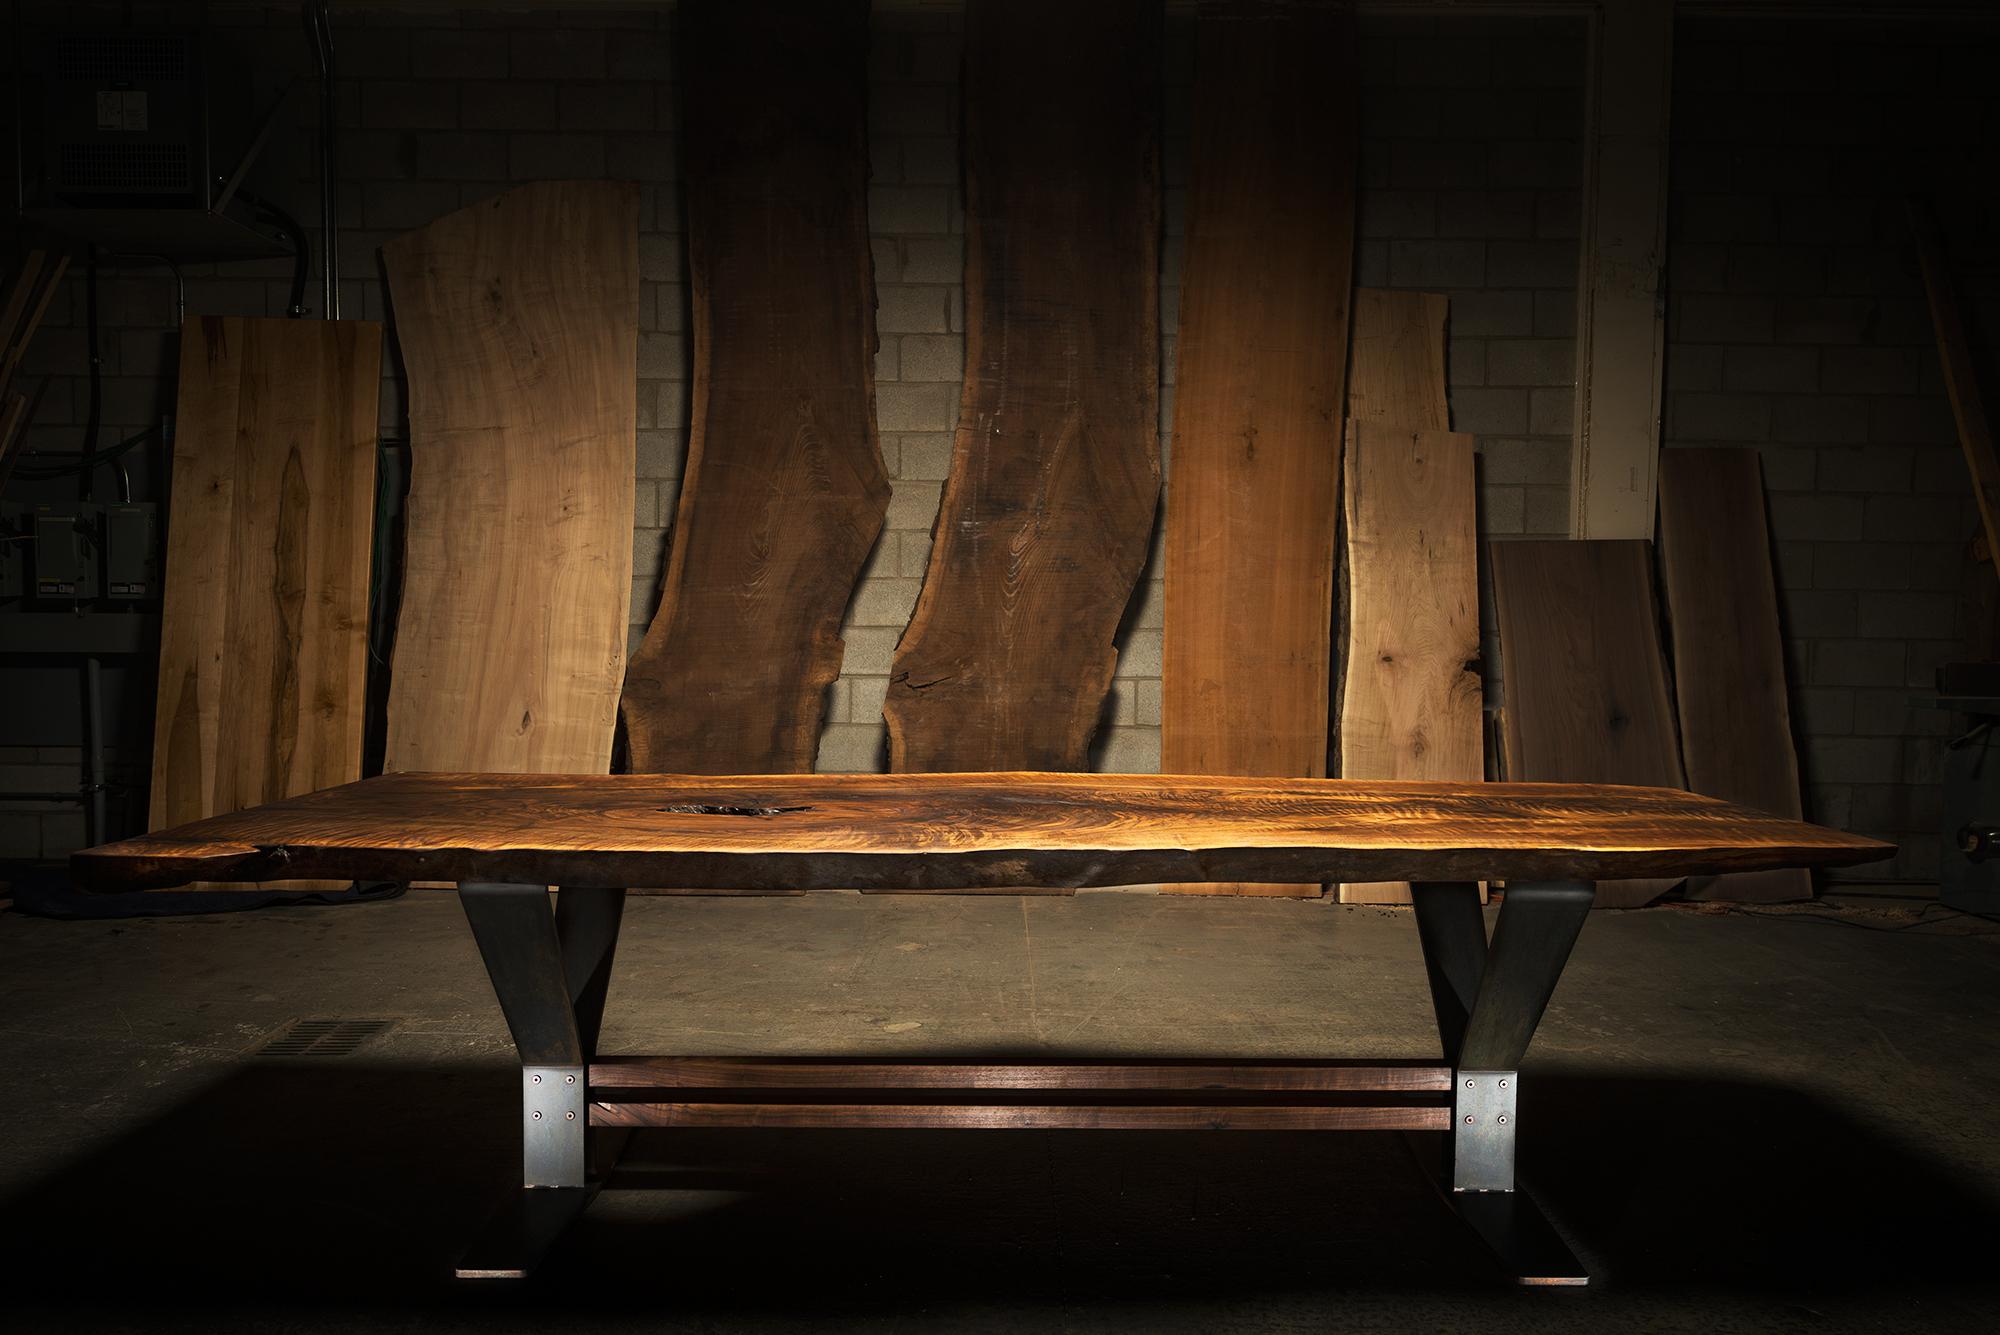 Our Bedford live edge dining table is handmade to order from Claro walnut slabs with a hand rubbed hard wax & oil finish that enhance the real beauty of the wood and give a natural warm touch. The elegant style came from our signature pedestal